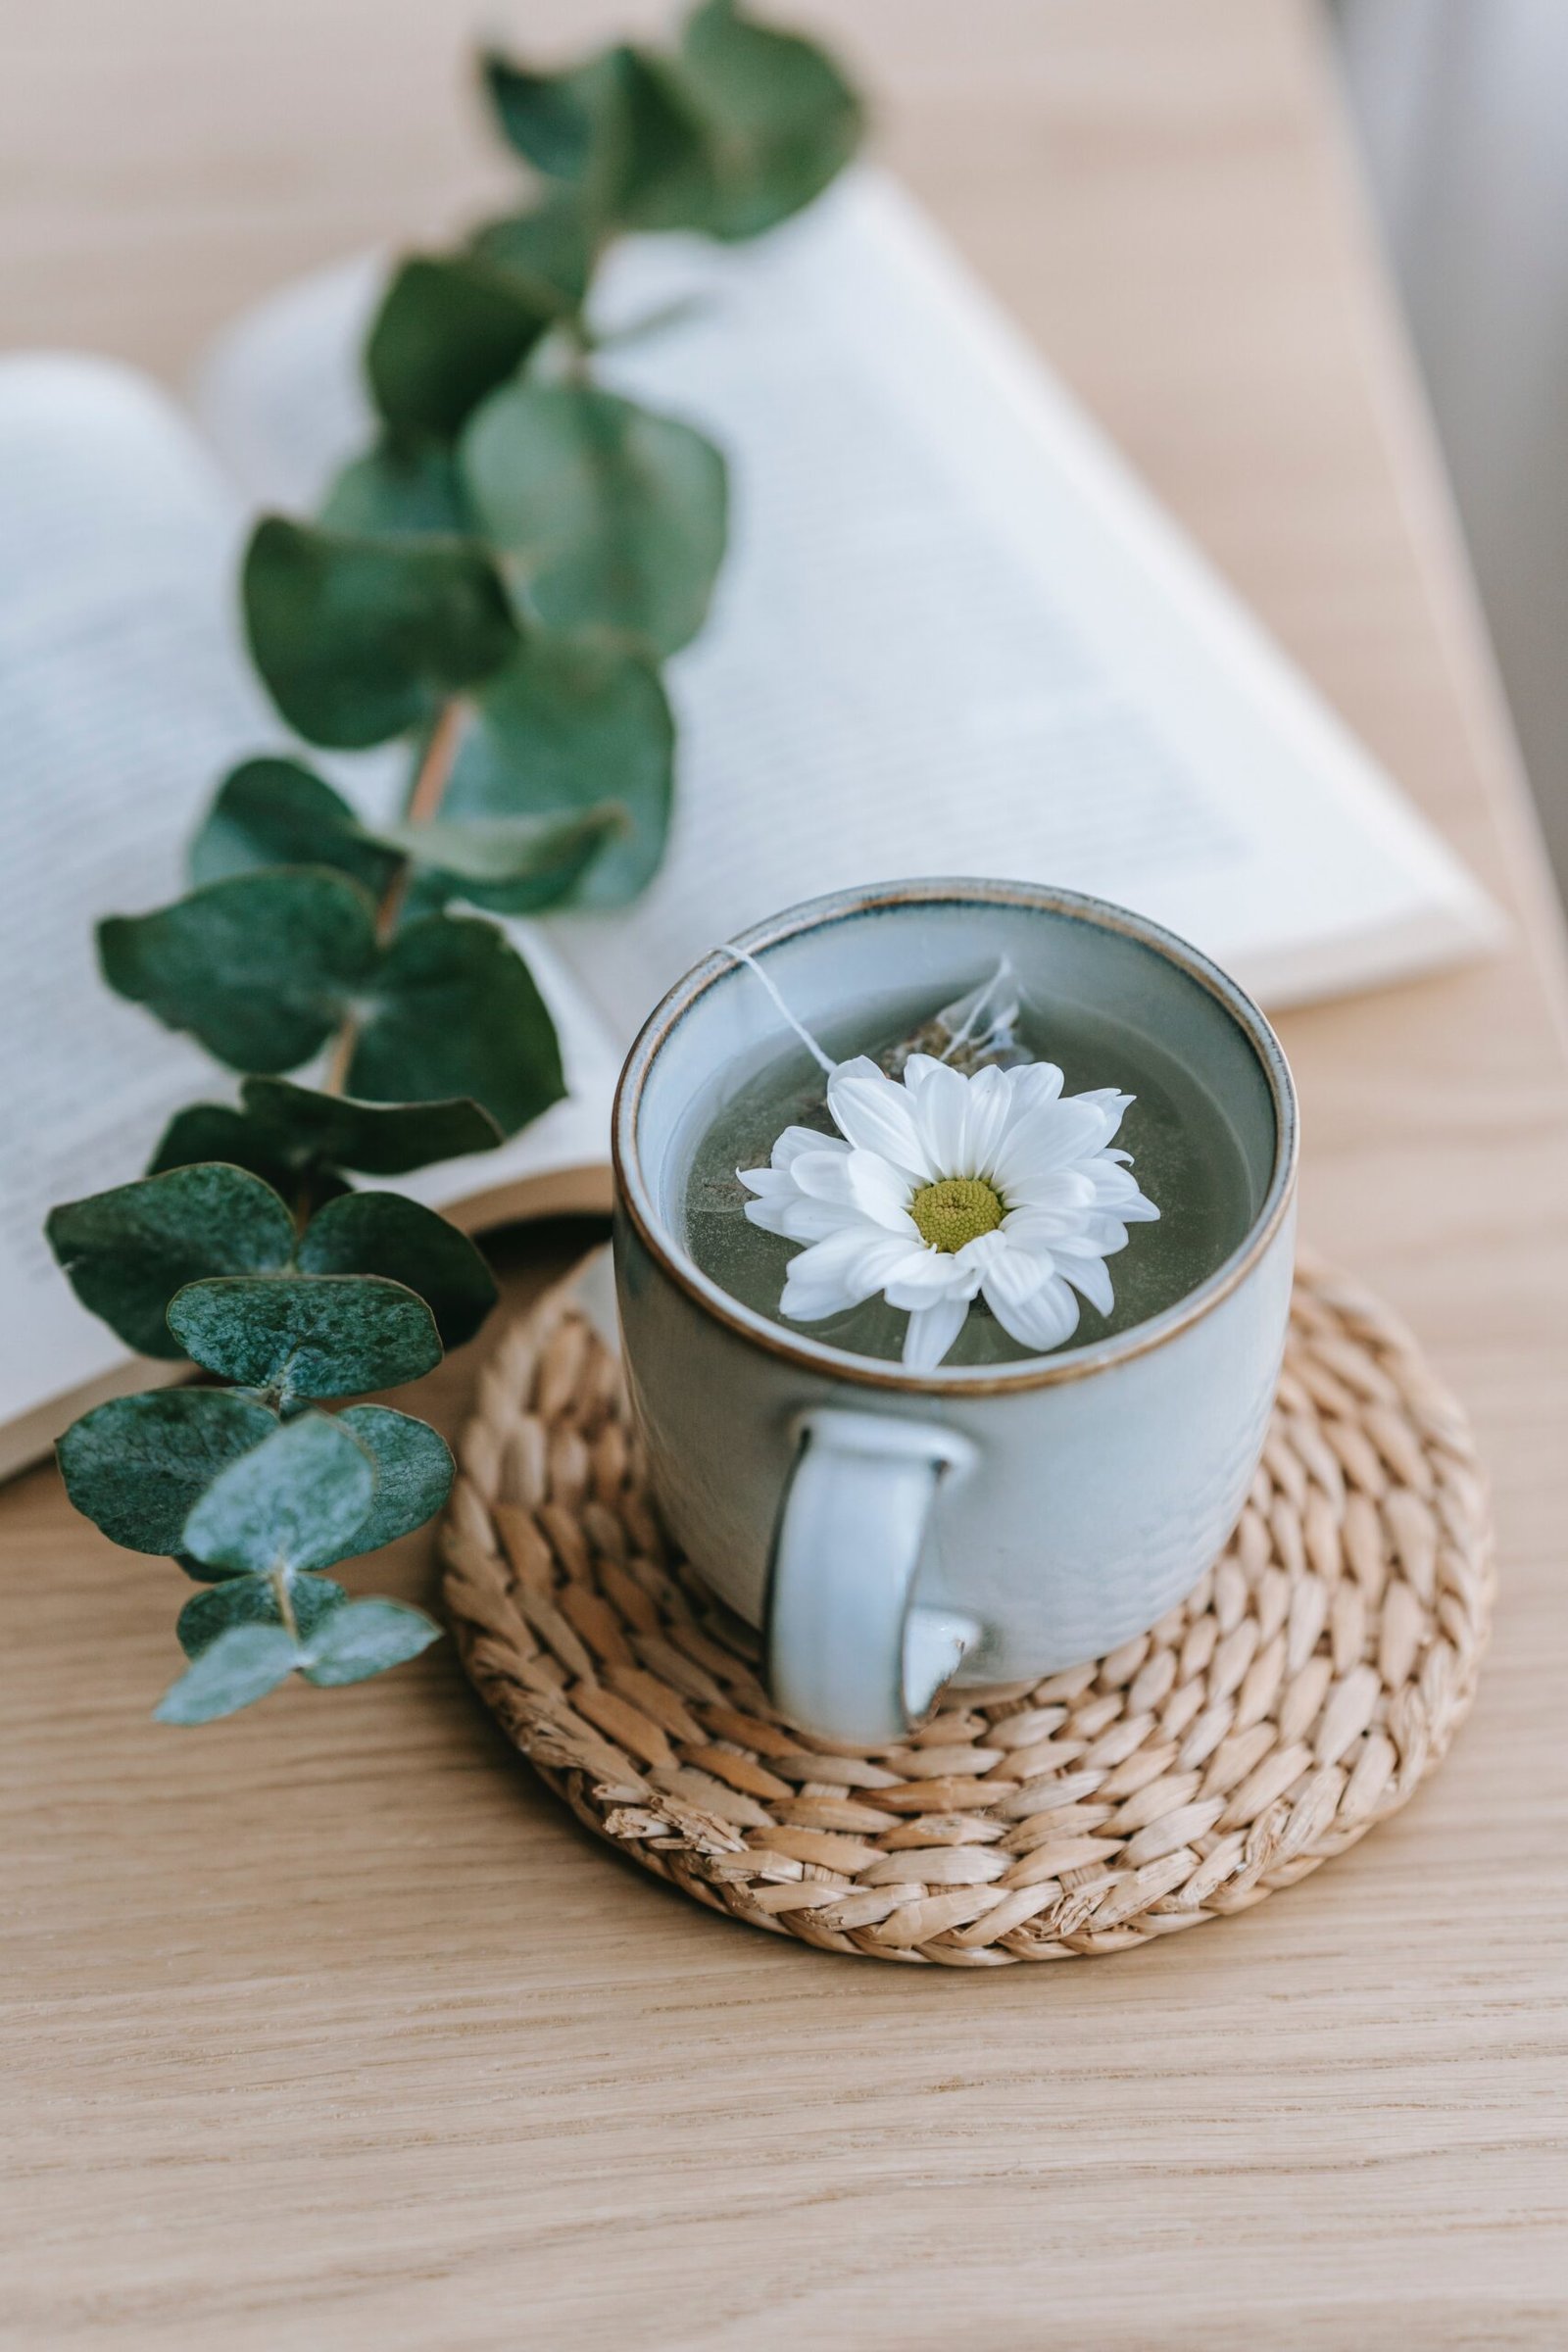 A white teacup filled with green tea, adorned with a white daisy, resting on a woven placemat with a branch of leaves beside it. An open book can be seen in the background on a wooden tabletop.